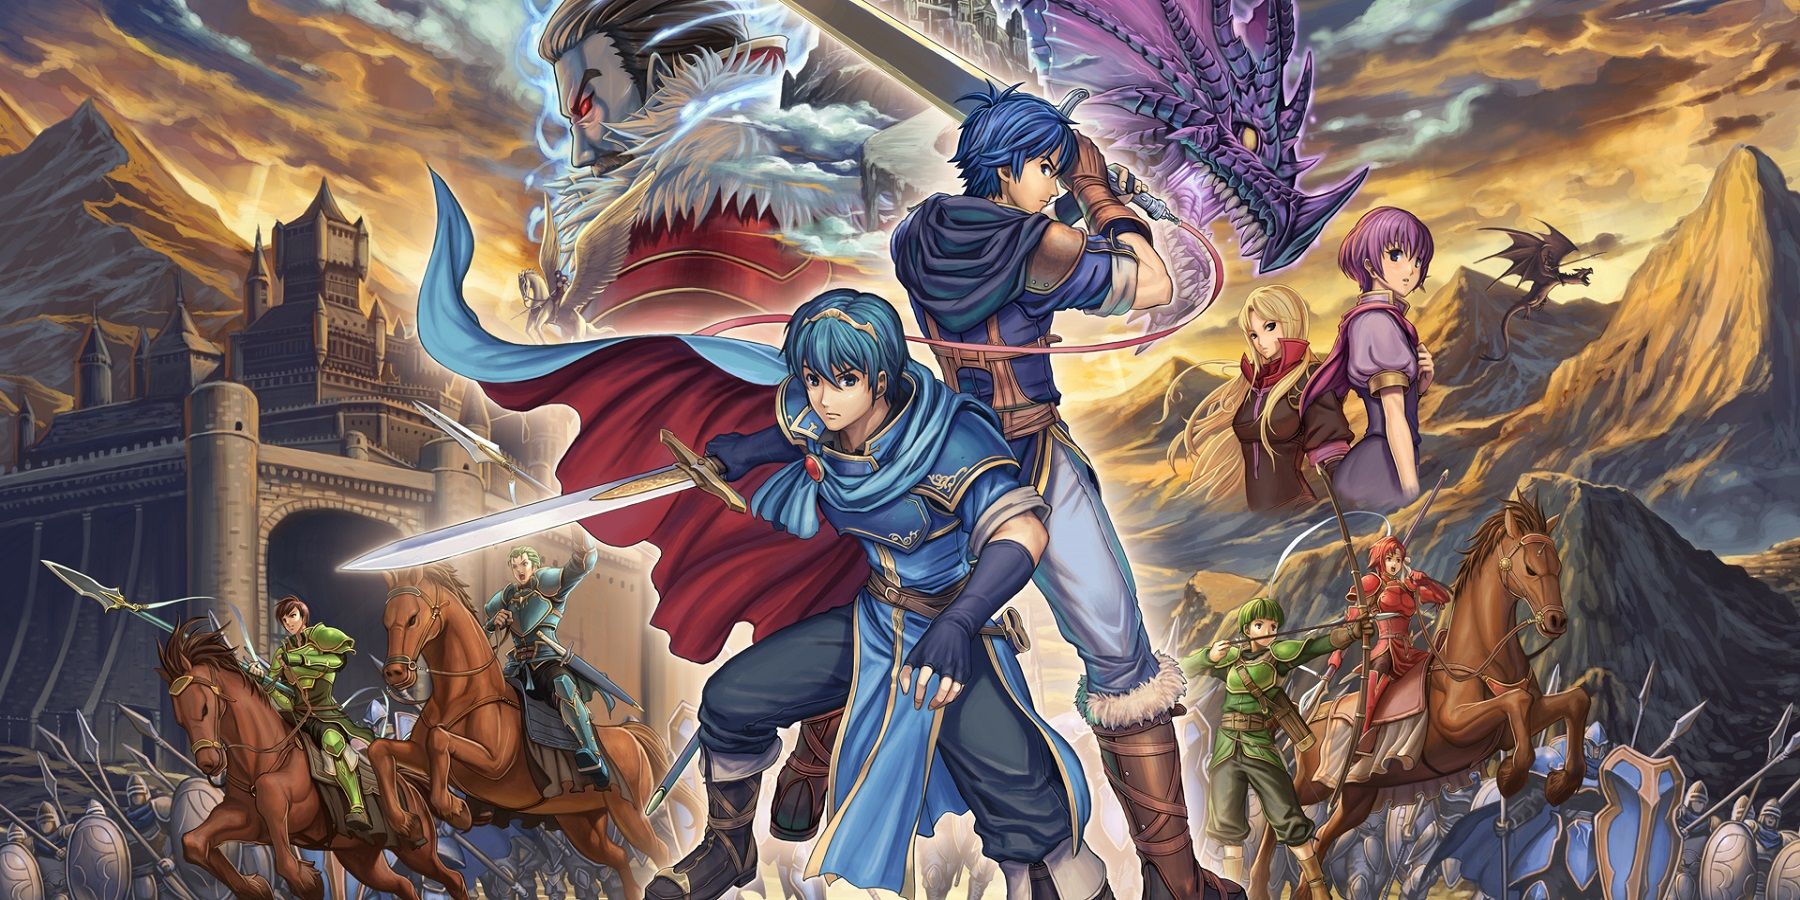 The lead heroes of Fire Emblem 12, with the villain in the background.